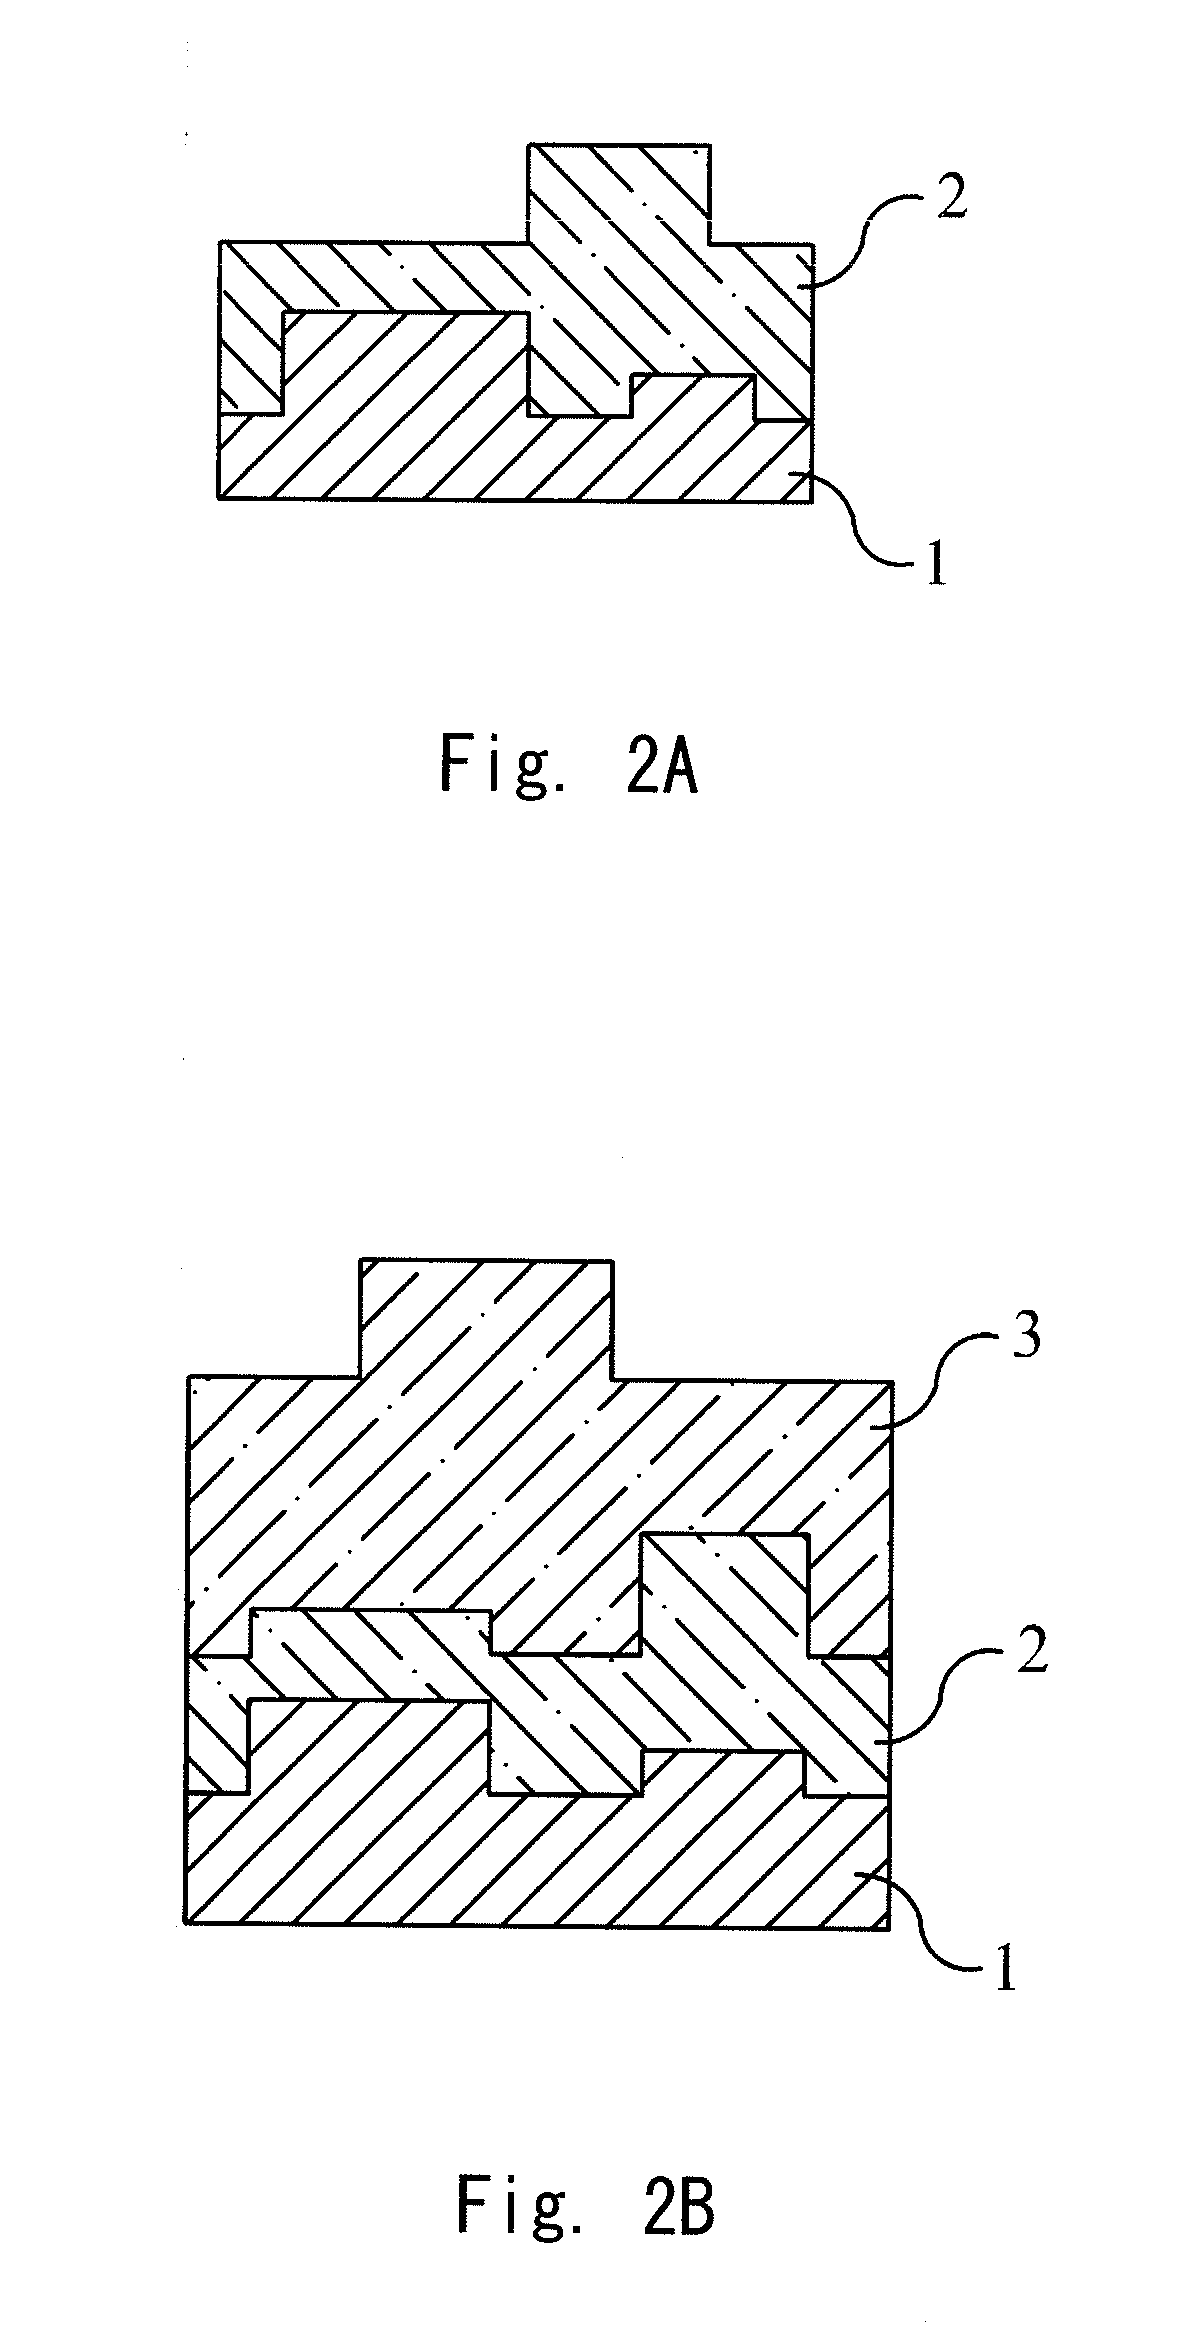 Method and apparatus for performing film thickness measurements using white light scanning interferometry